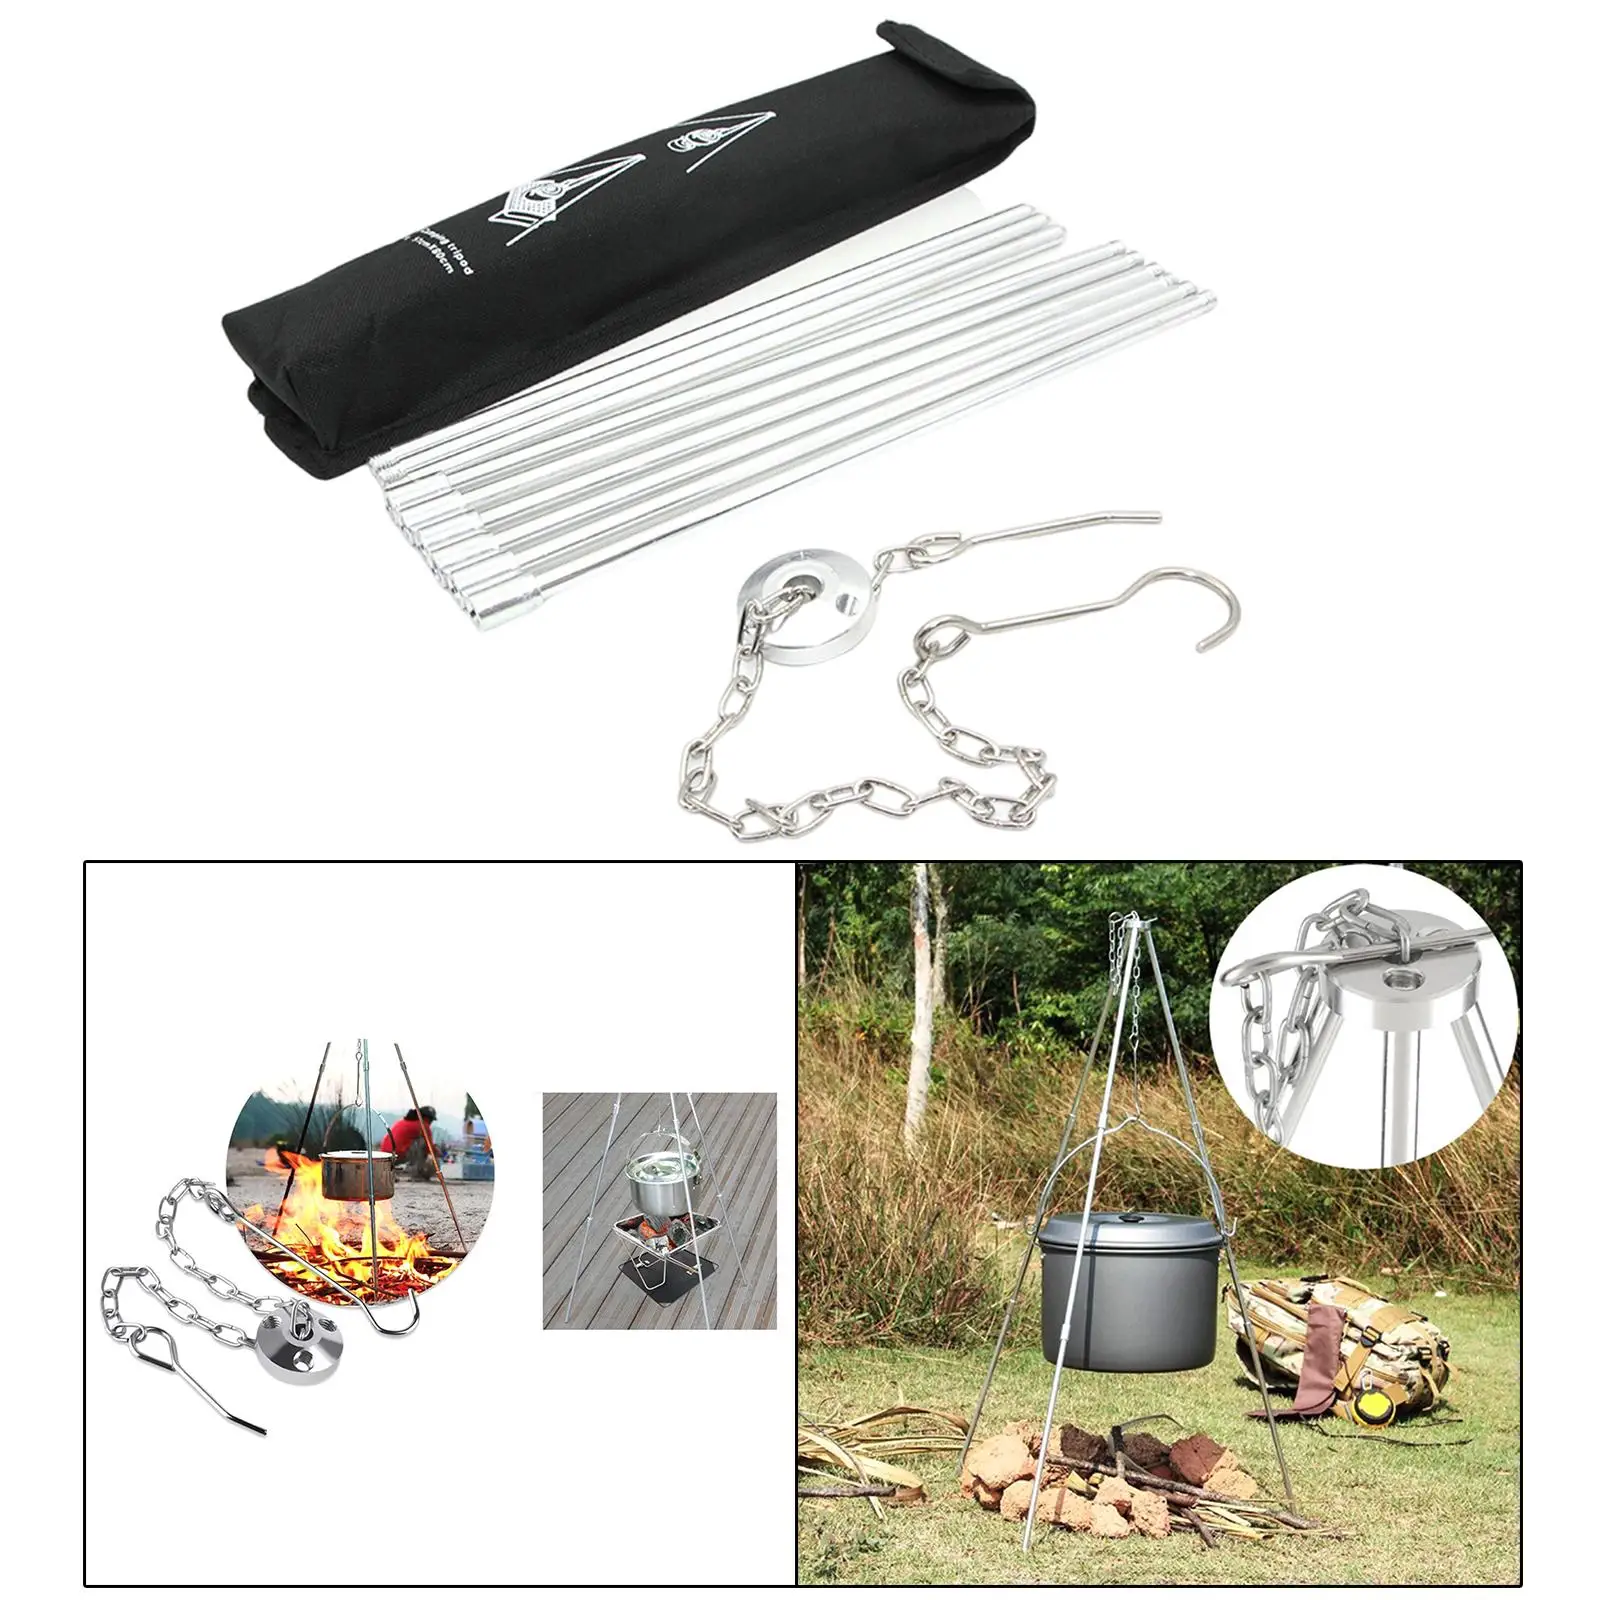 Portable Camping Tripod with Storage Bag Adjustable Cooking Pot Grill for BBQ